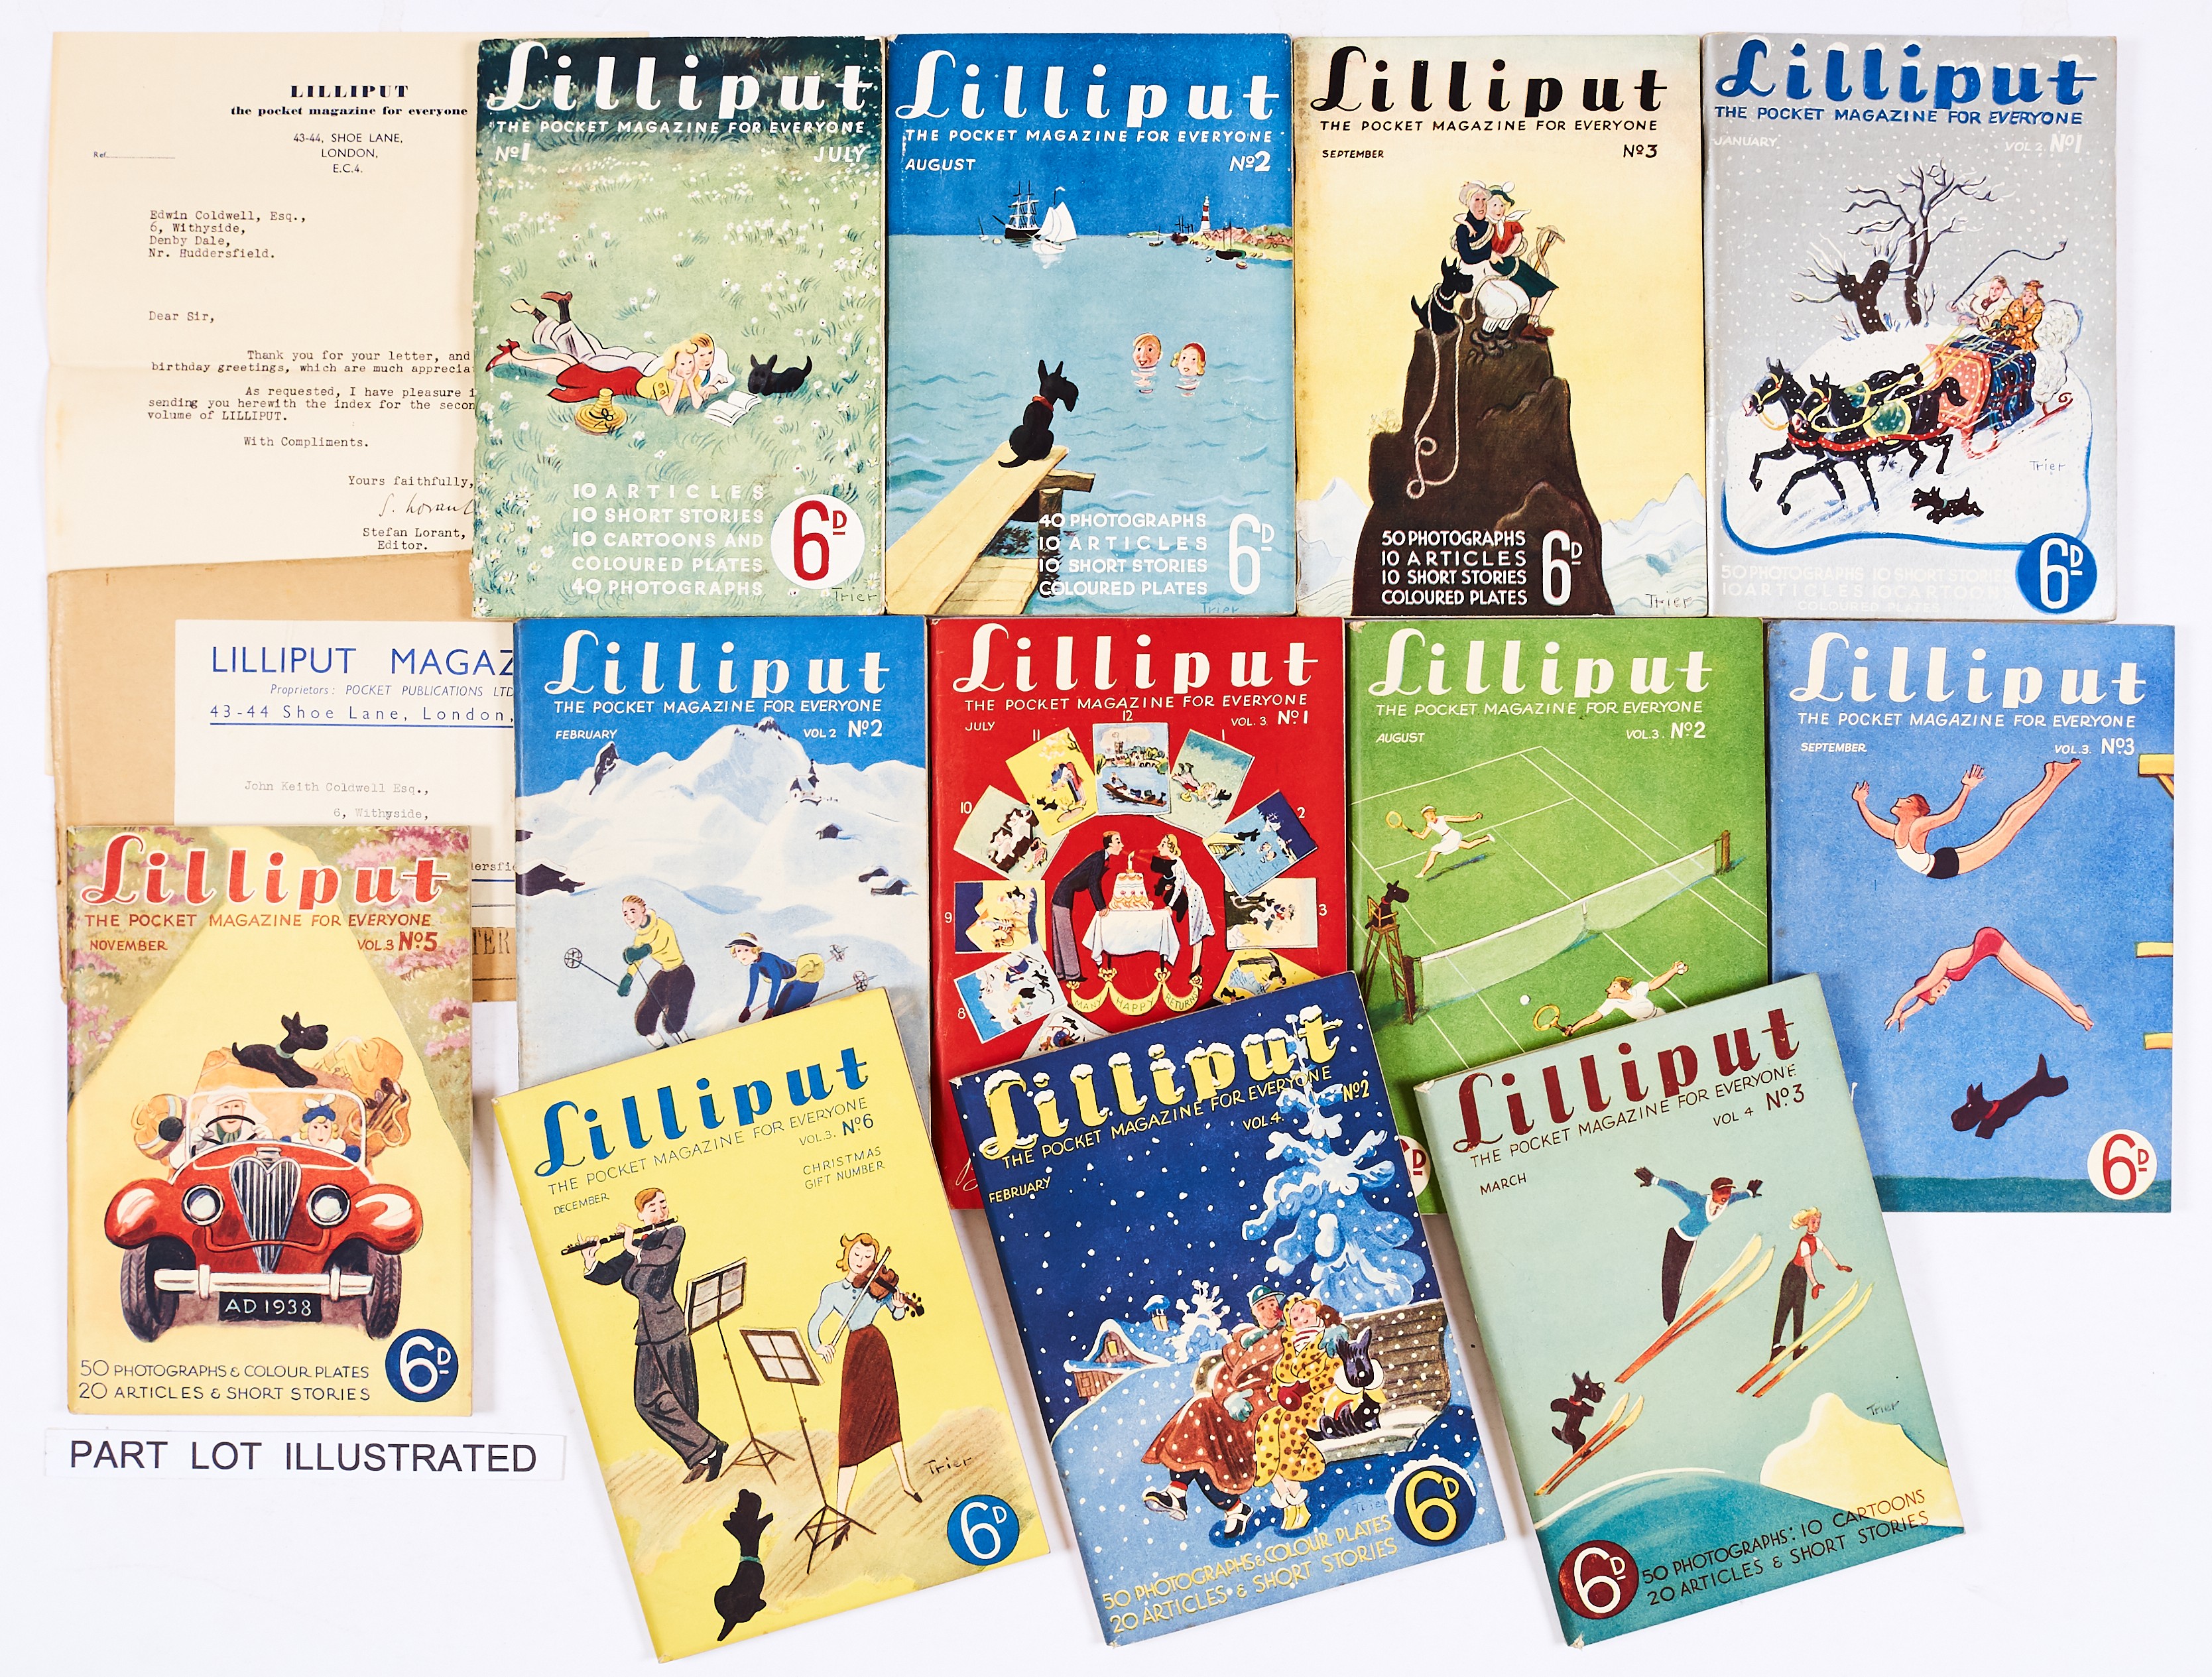 Lilliput Magazine (1937-39) 1-24 with original 1938 headed letter to a subscriber signed by editor